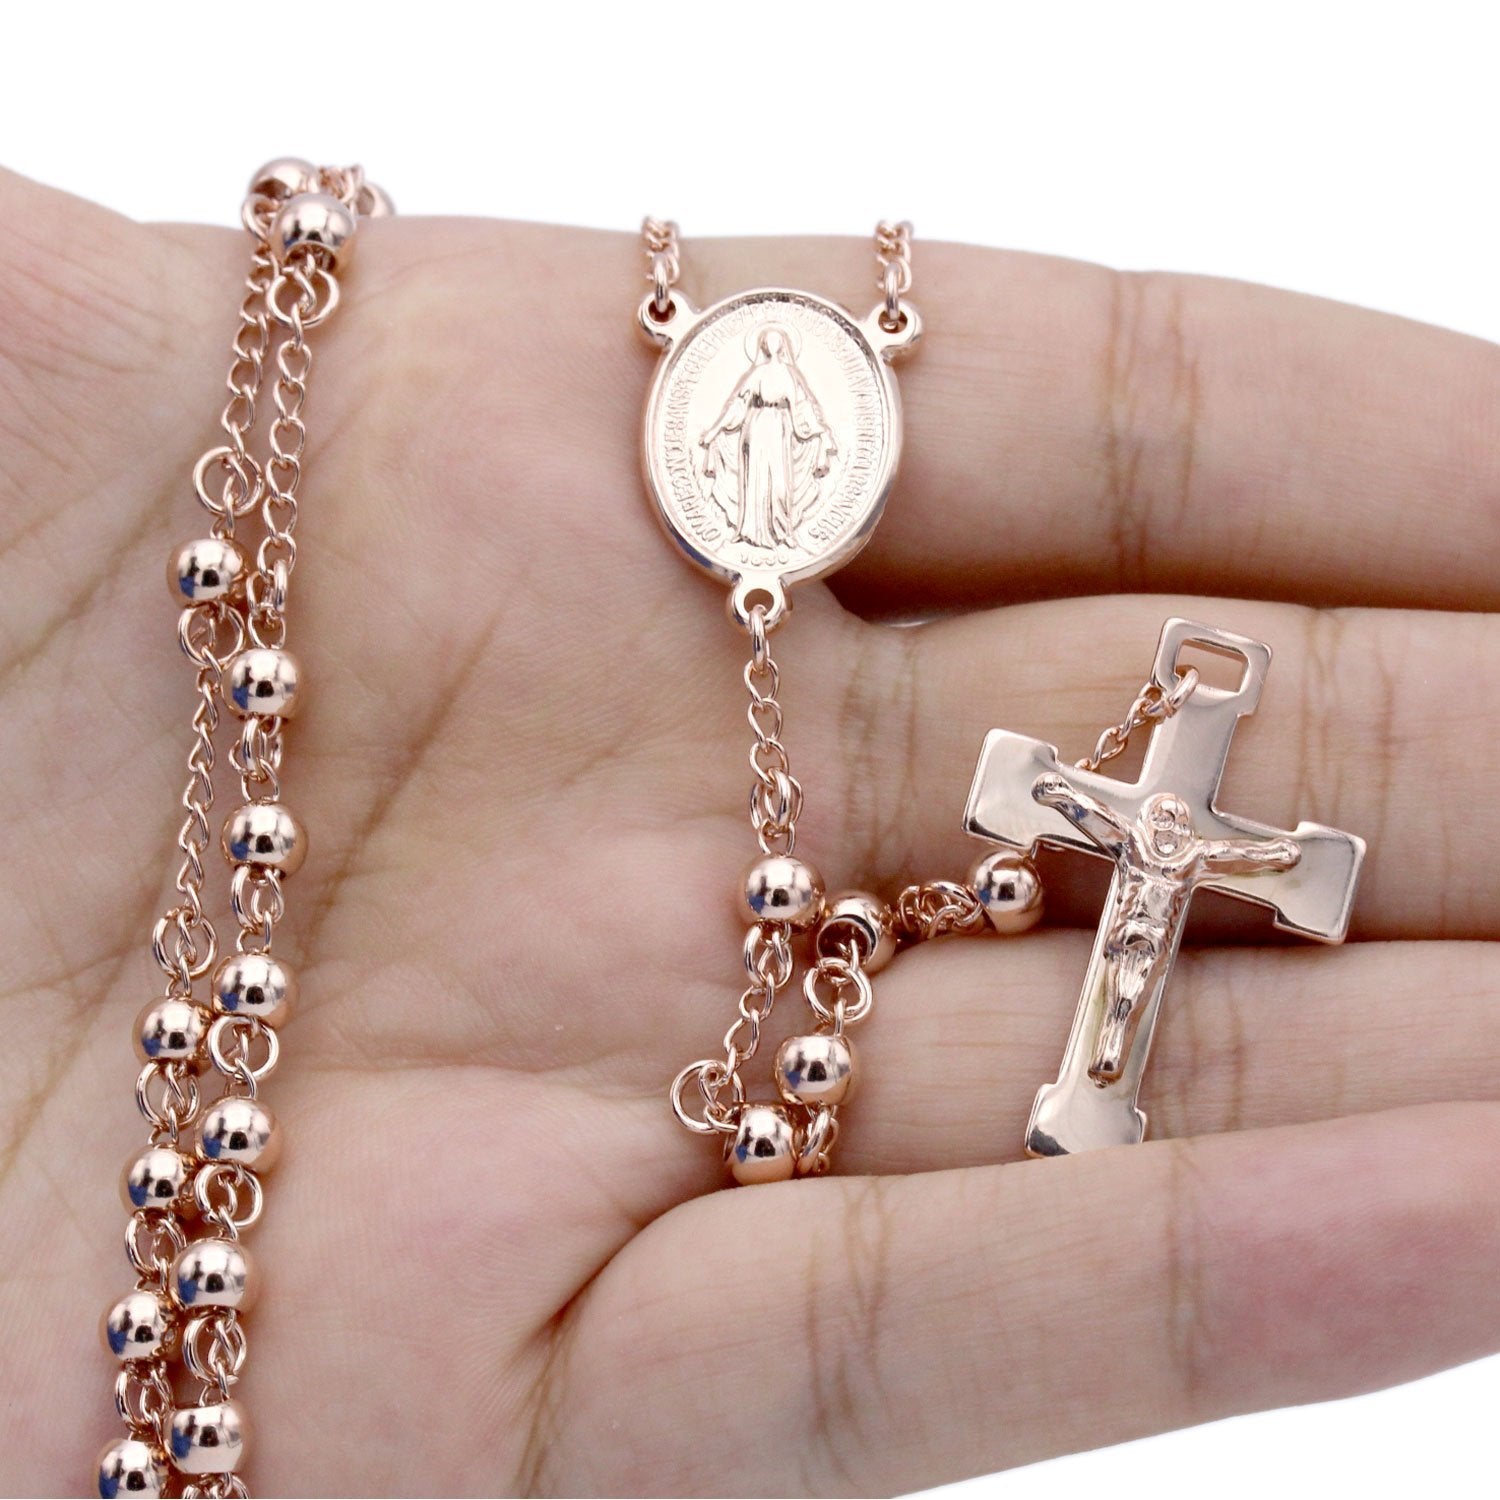 Traditional Rose Gold Rosary Necklace Five Decade Catholic Prayer Beads 5mm